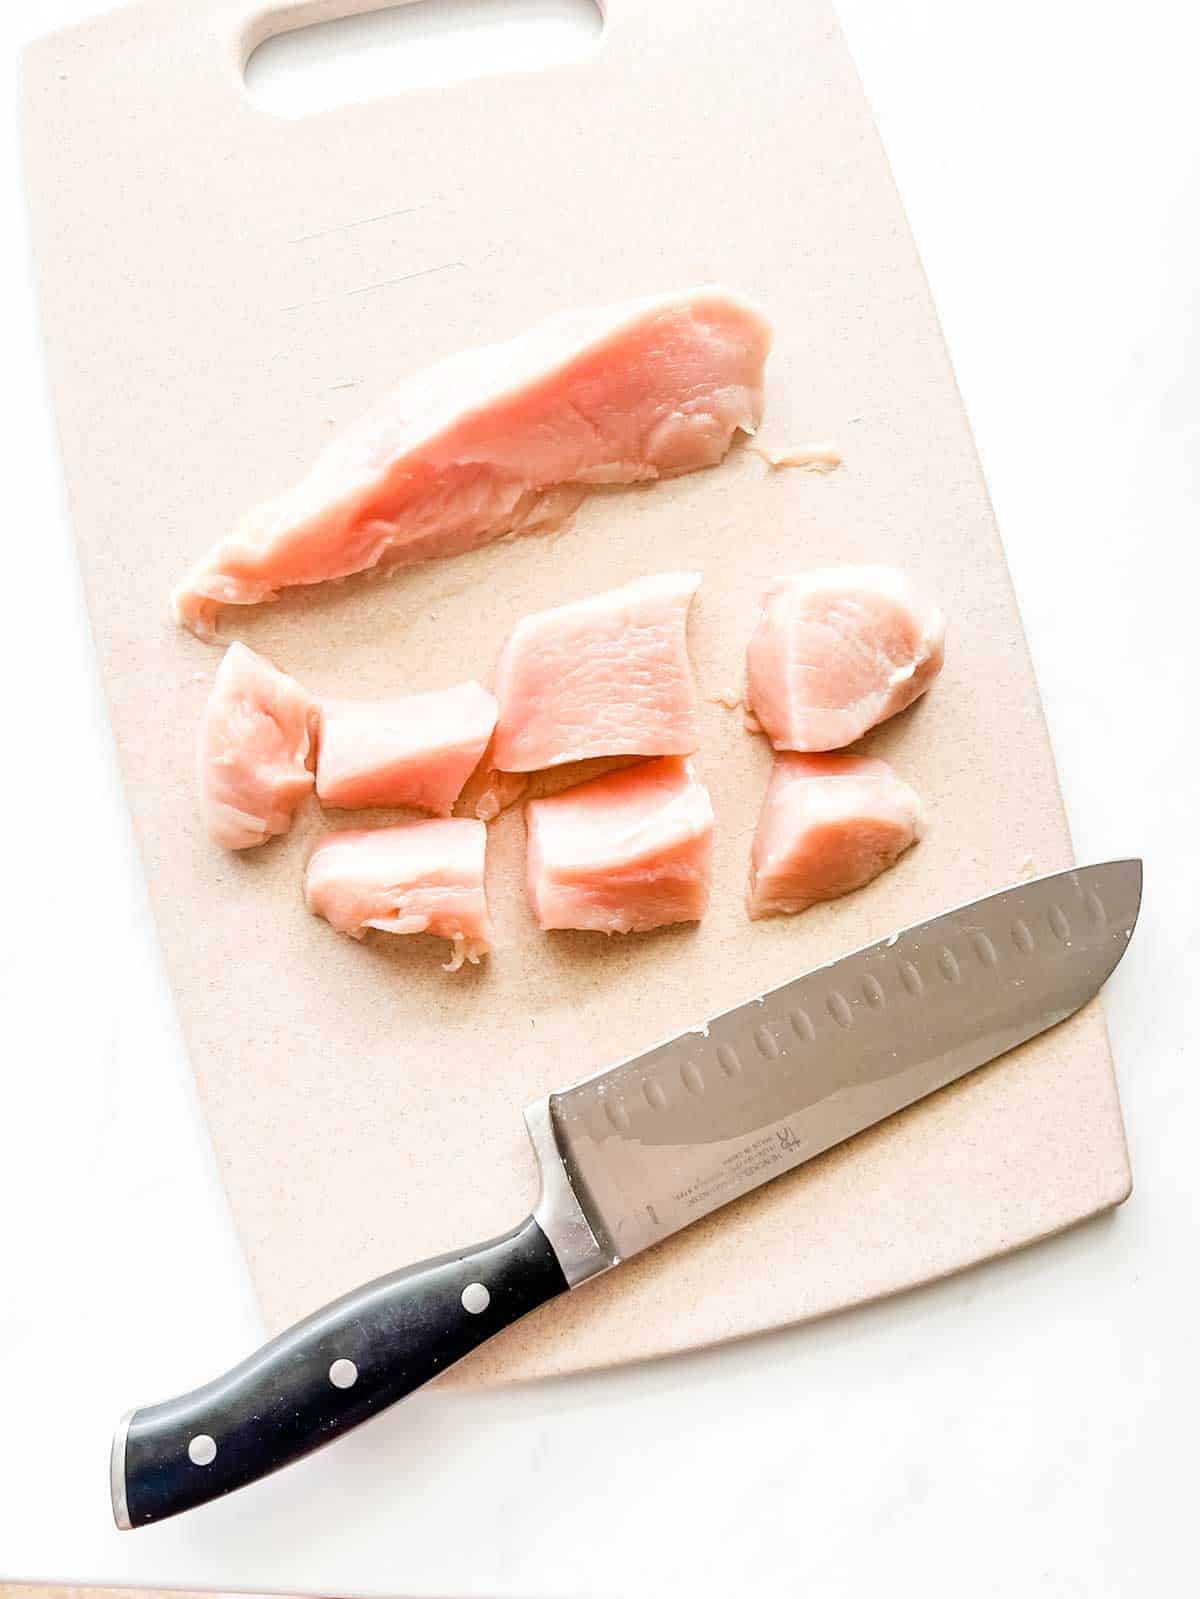 Photo of boneless skinless chicken breast being cut for chicken nuggets.